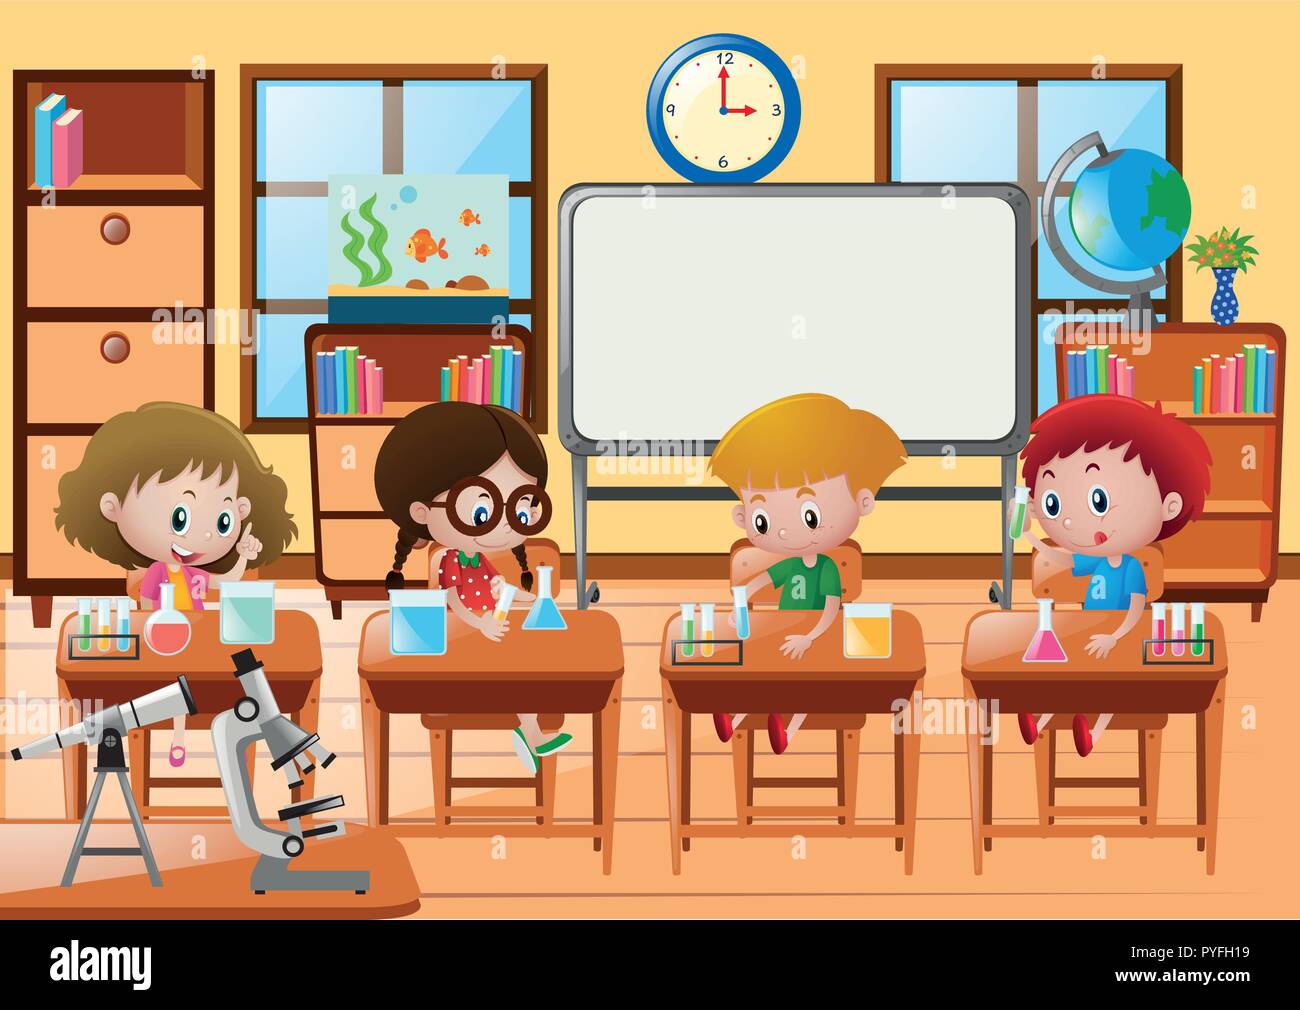 Students doing experiment in science class illustration Stock Vector